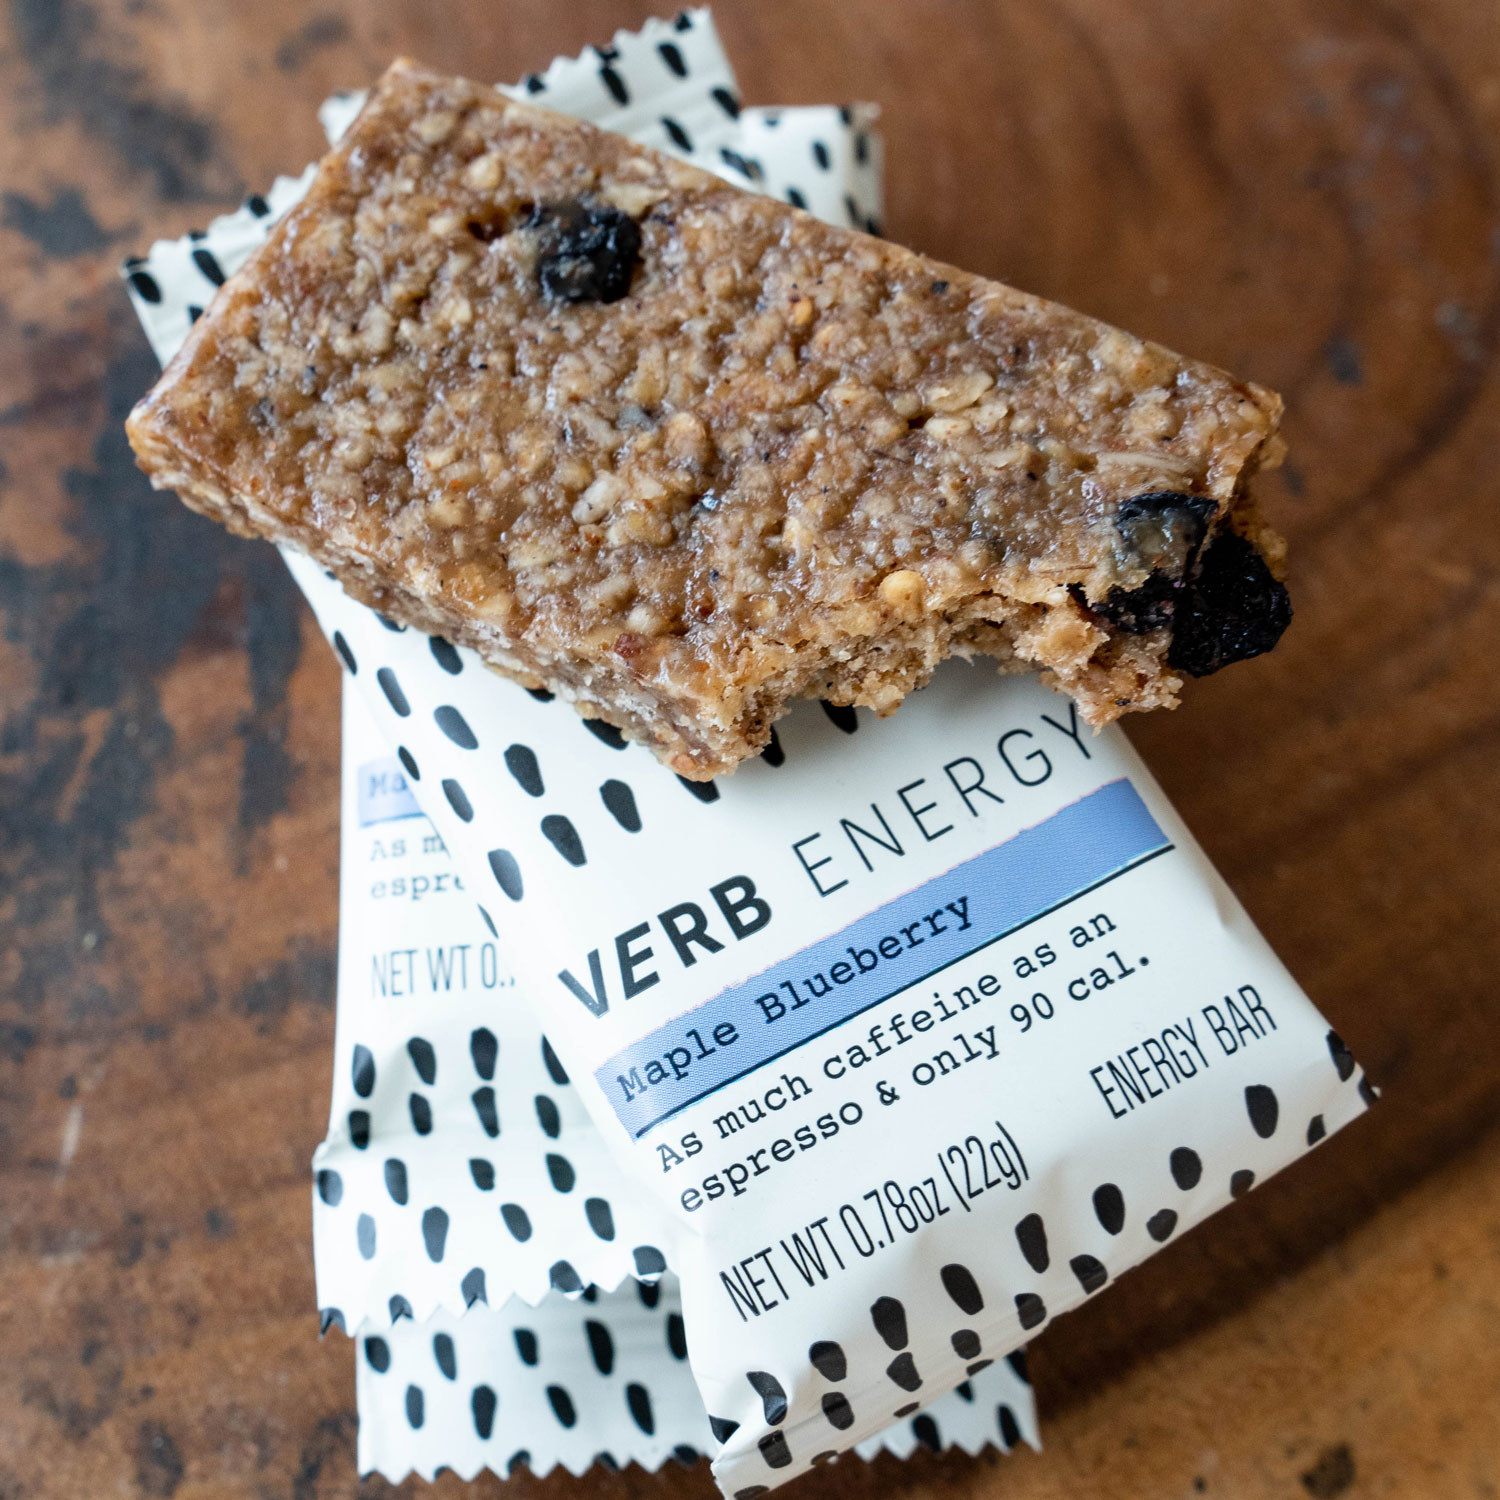 The maple blueberry bar